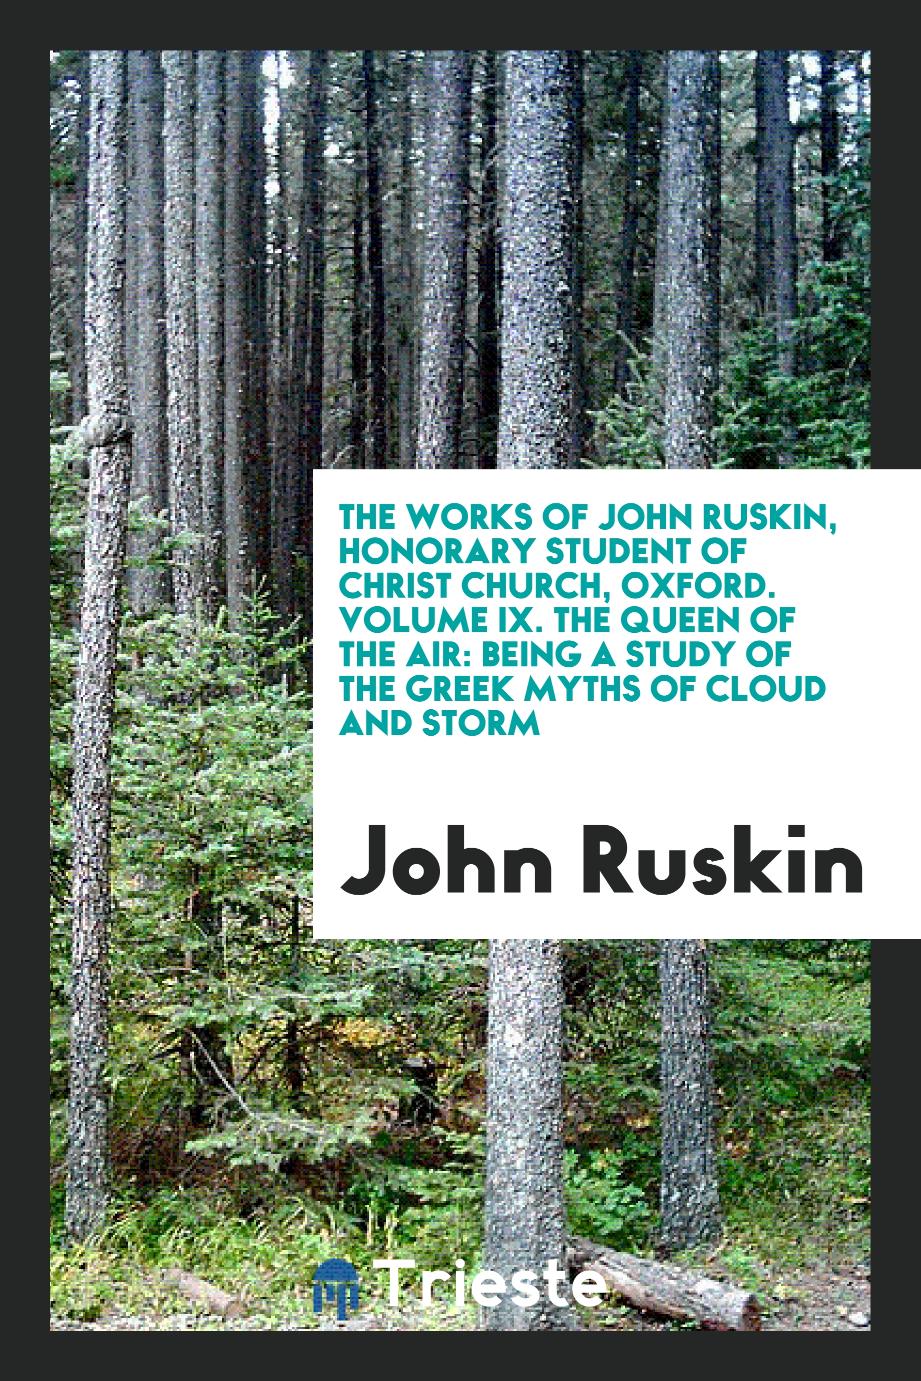 The Works of John Ruskin, Honorary Student of Christ Church, Oxford. Volume IX. The Queen of the Air: Being a Study of the Greek Myths of Cloud and Storm